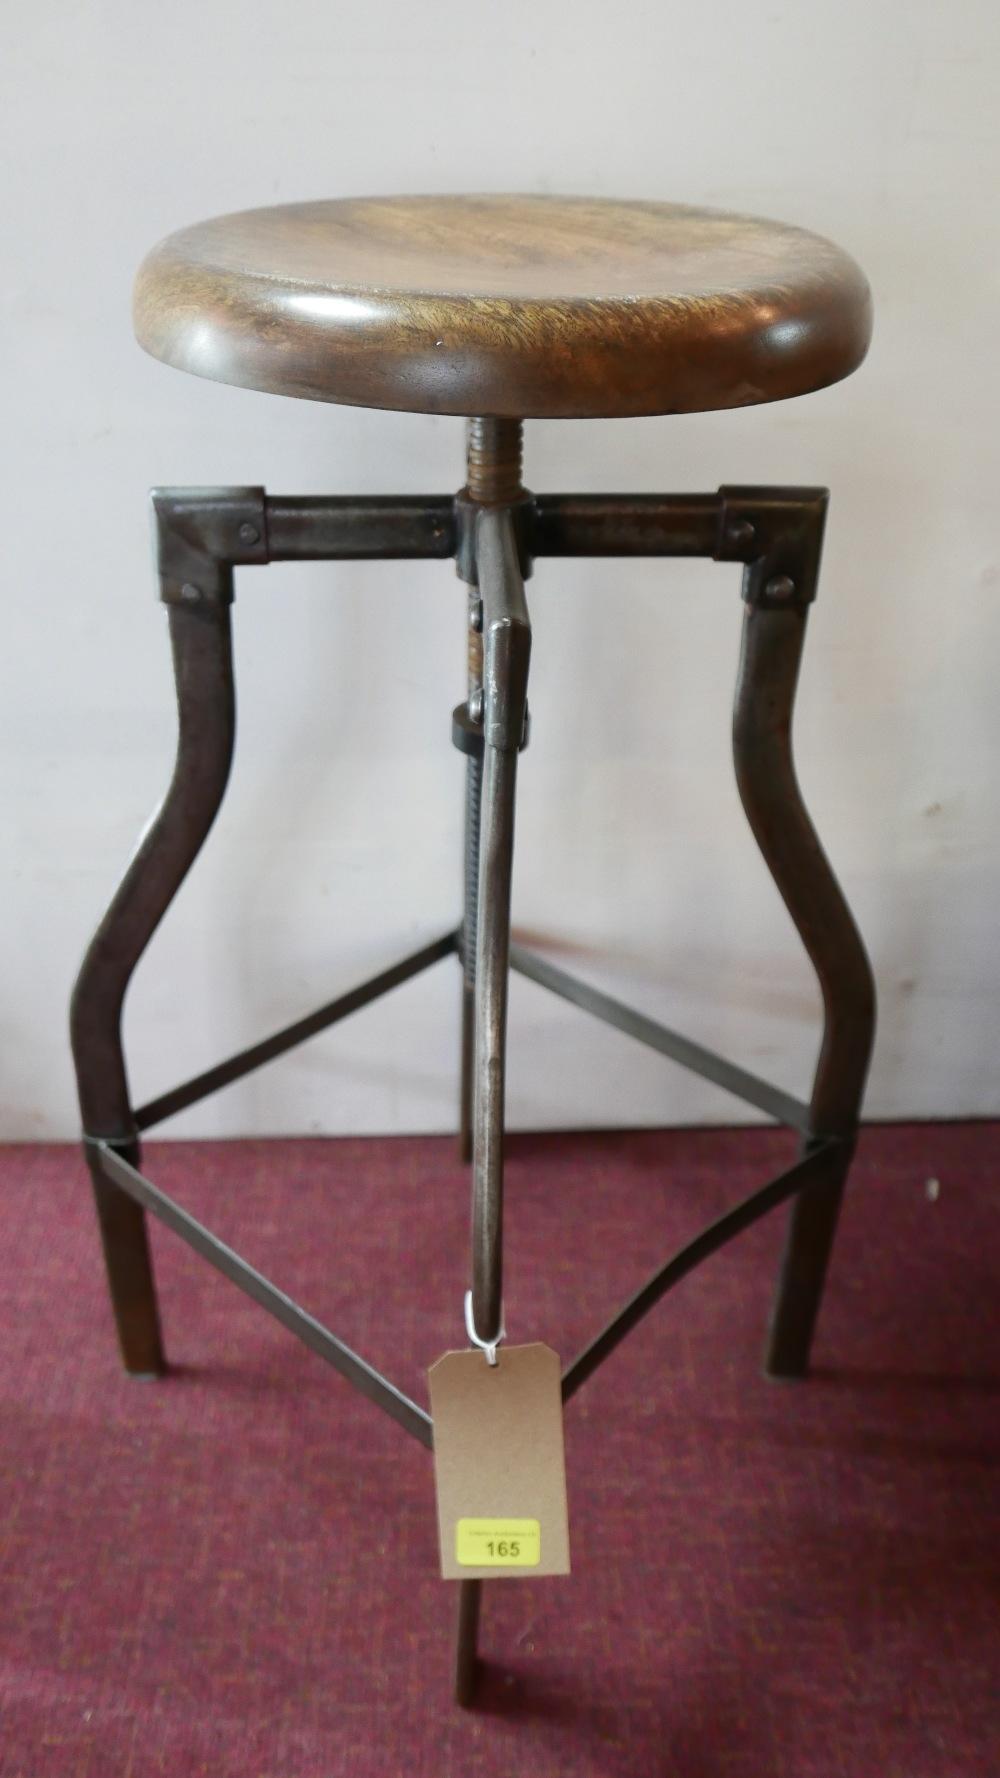 An industrial style adjustable revolving stool